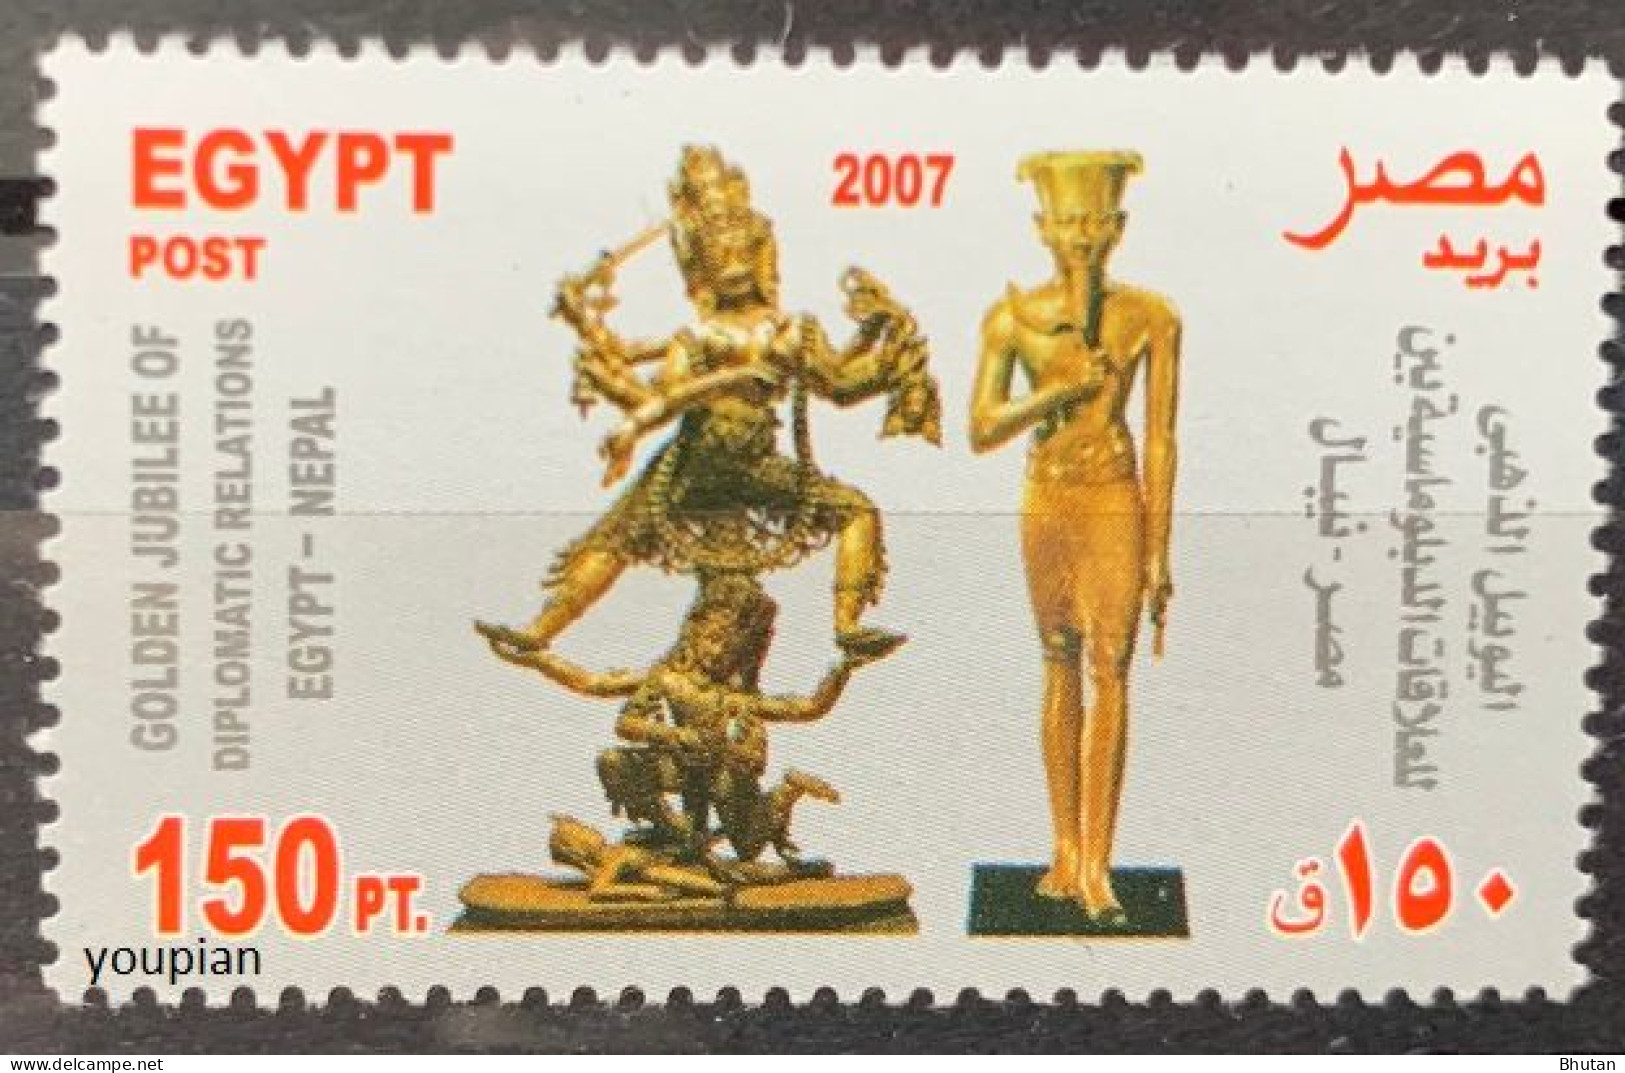 Egypt 2007, Golden Jubilee Of Diplomatic Relation With Nepal, MNH Single Stamp - Neufs